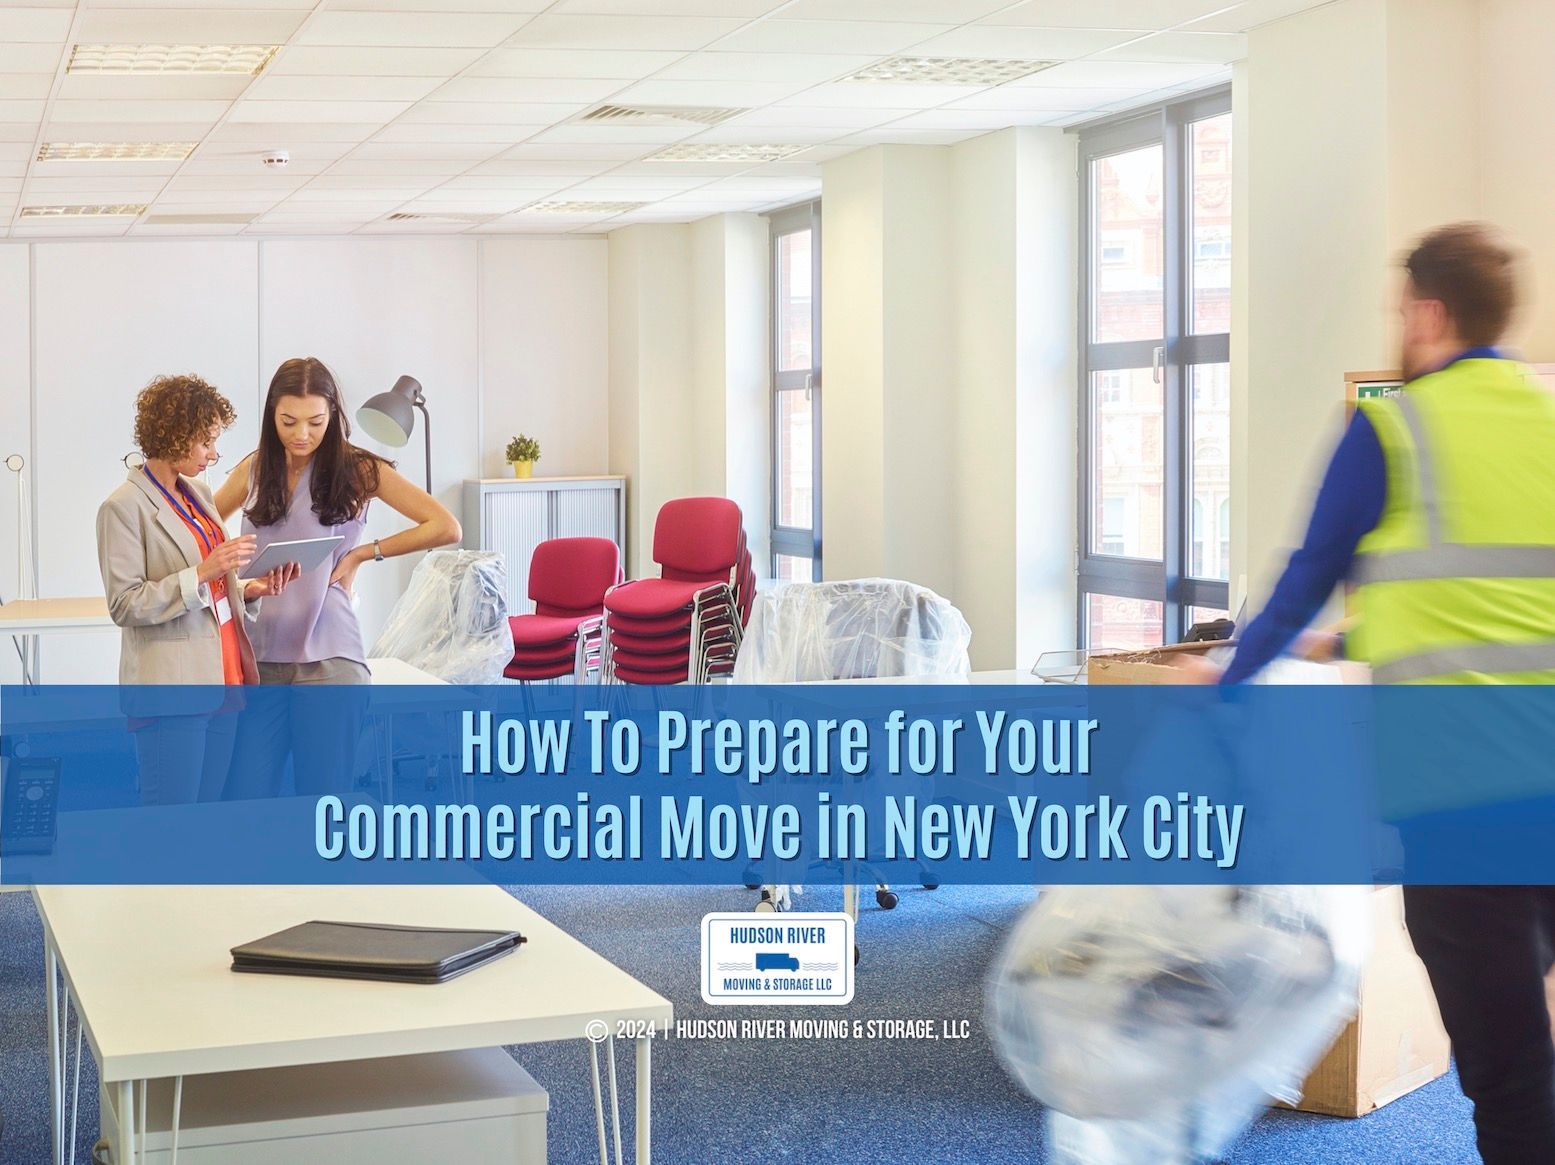 Guide cover on how to prepare for a commercial move in New York City, with tips from Hudson River Mo